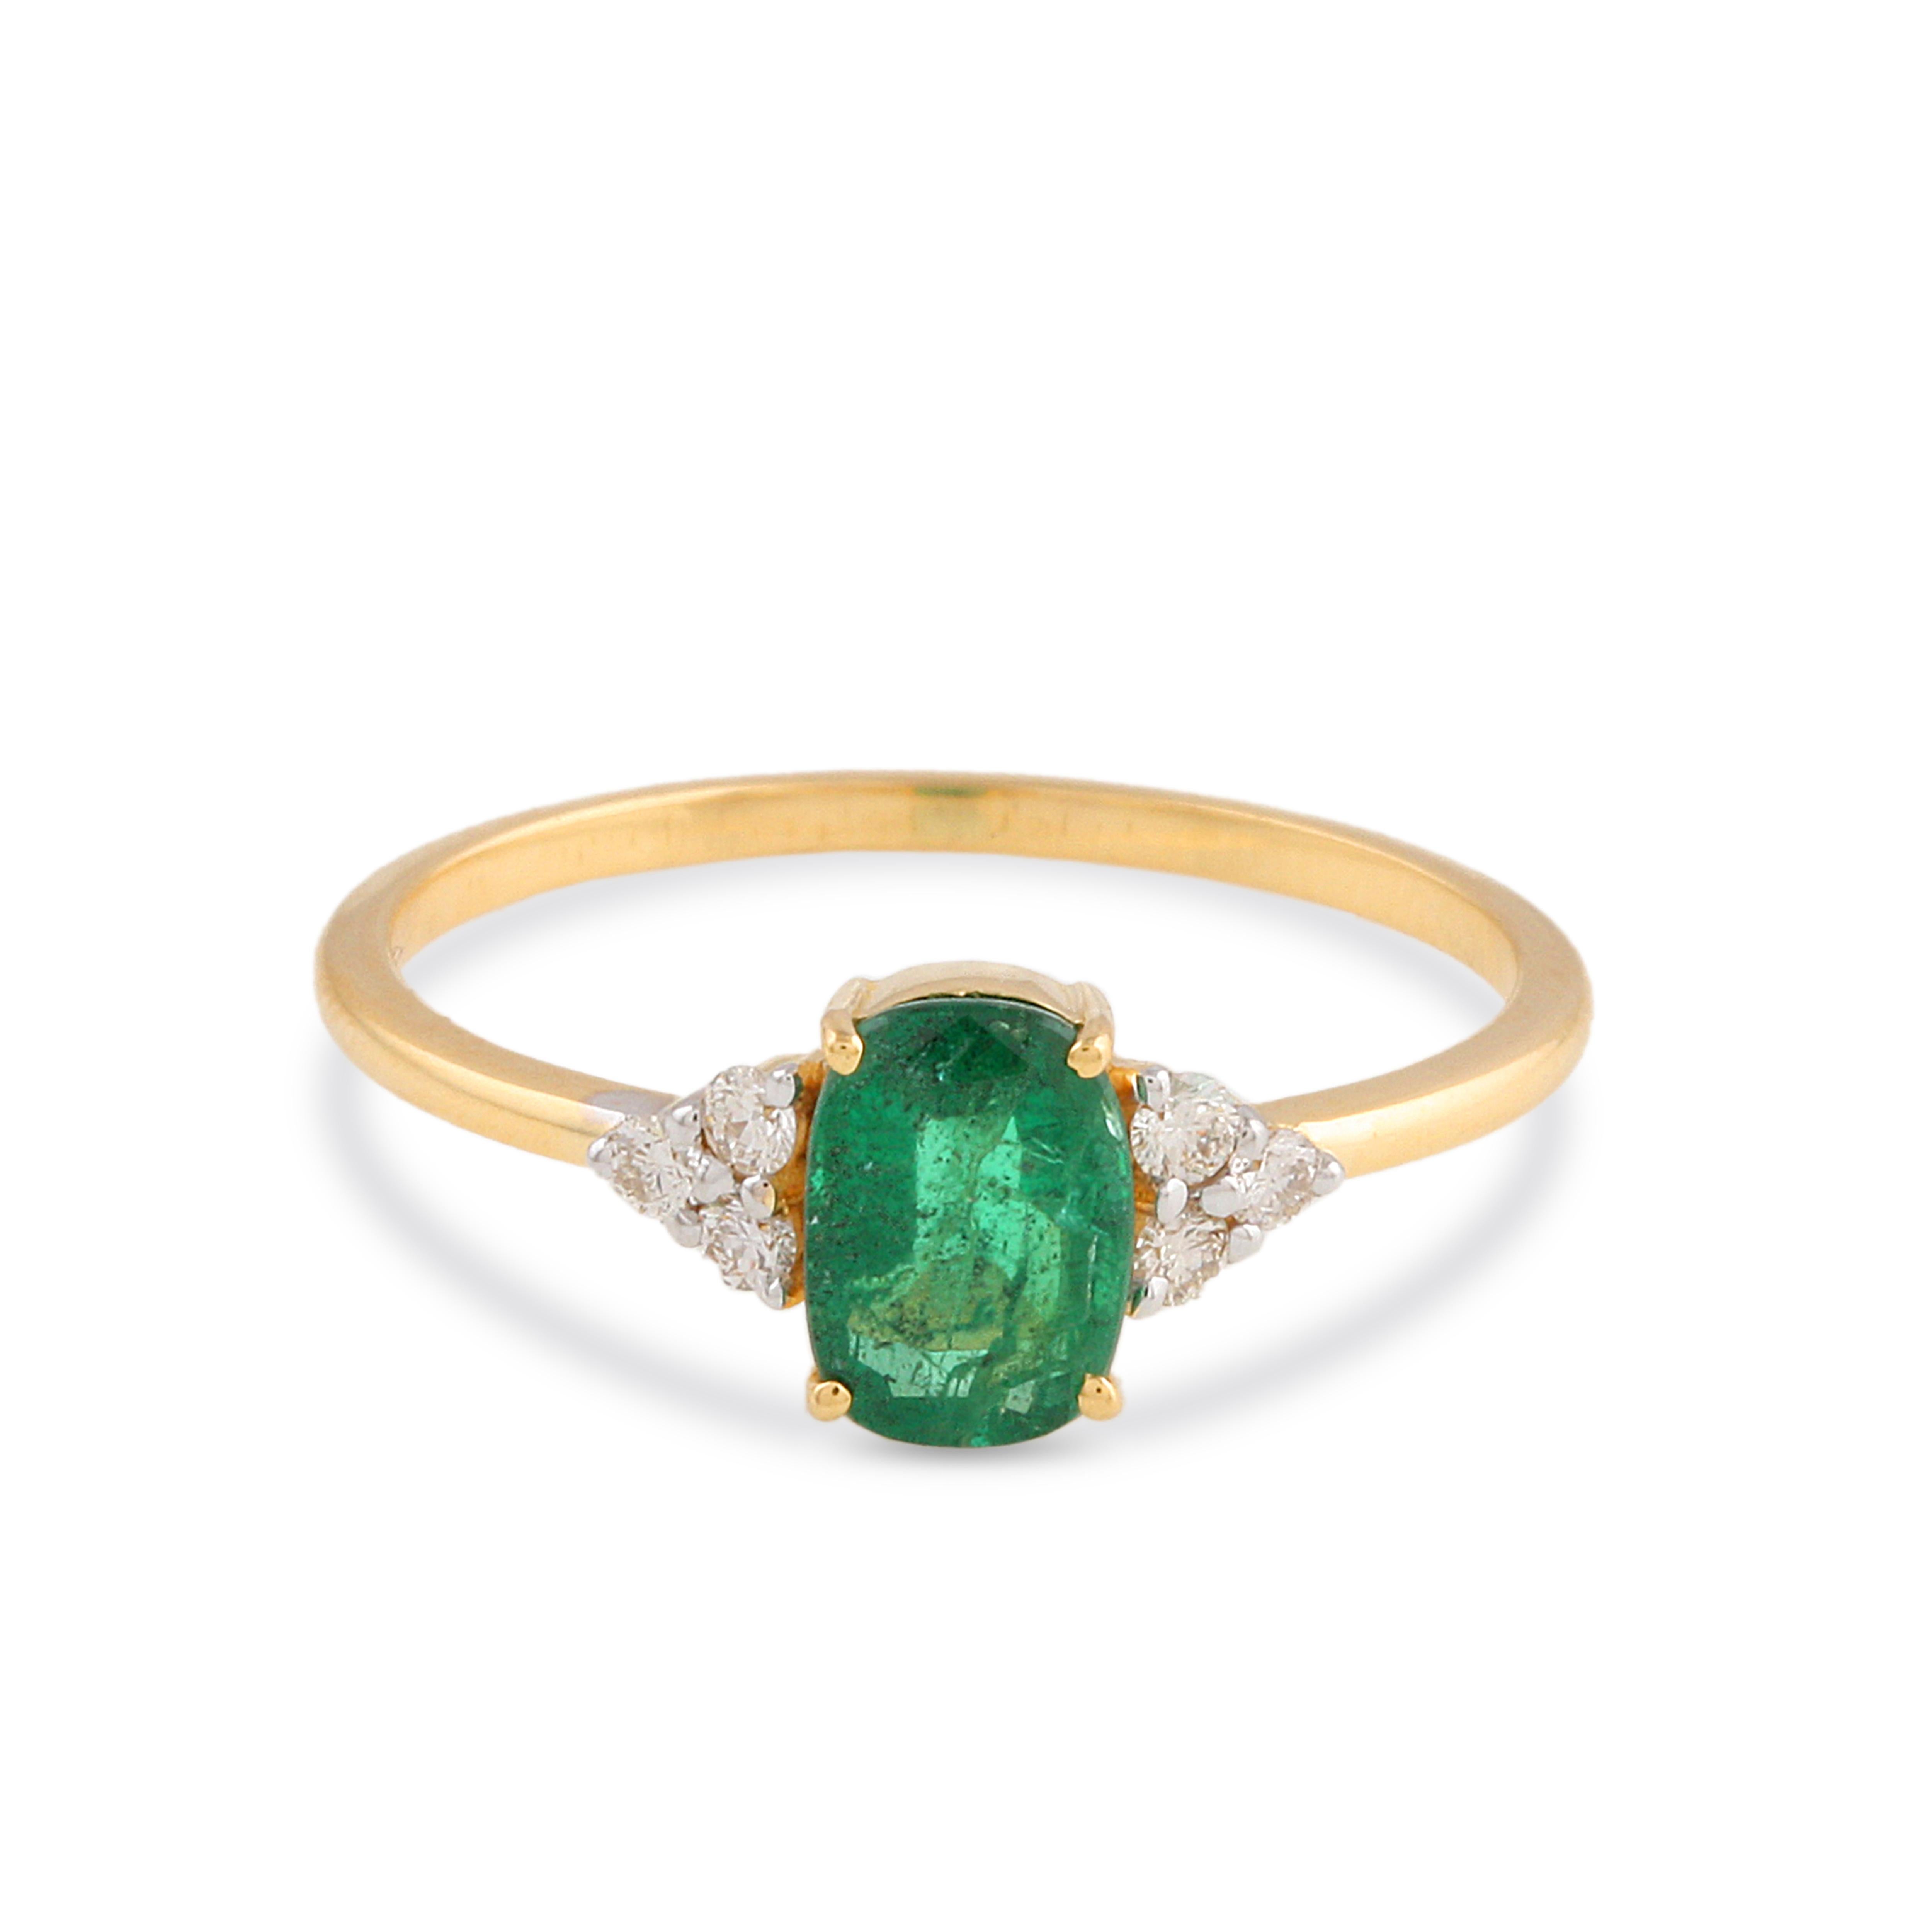 Tresor Beautiful Ring feature 0.65 carats of Emerald and 0.05 carats of Diamond. The Ring are an ode to the luxurious yet classic beauty with sparkly gemstones and feminine hues. Their contemporary and modern design make them perfect and versatile